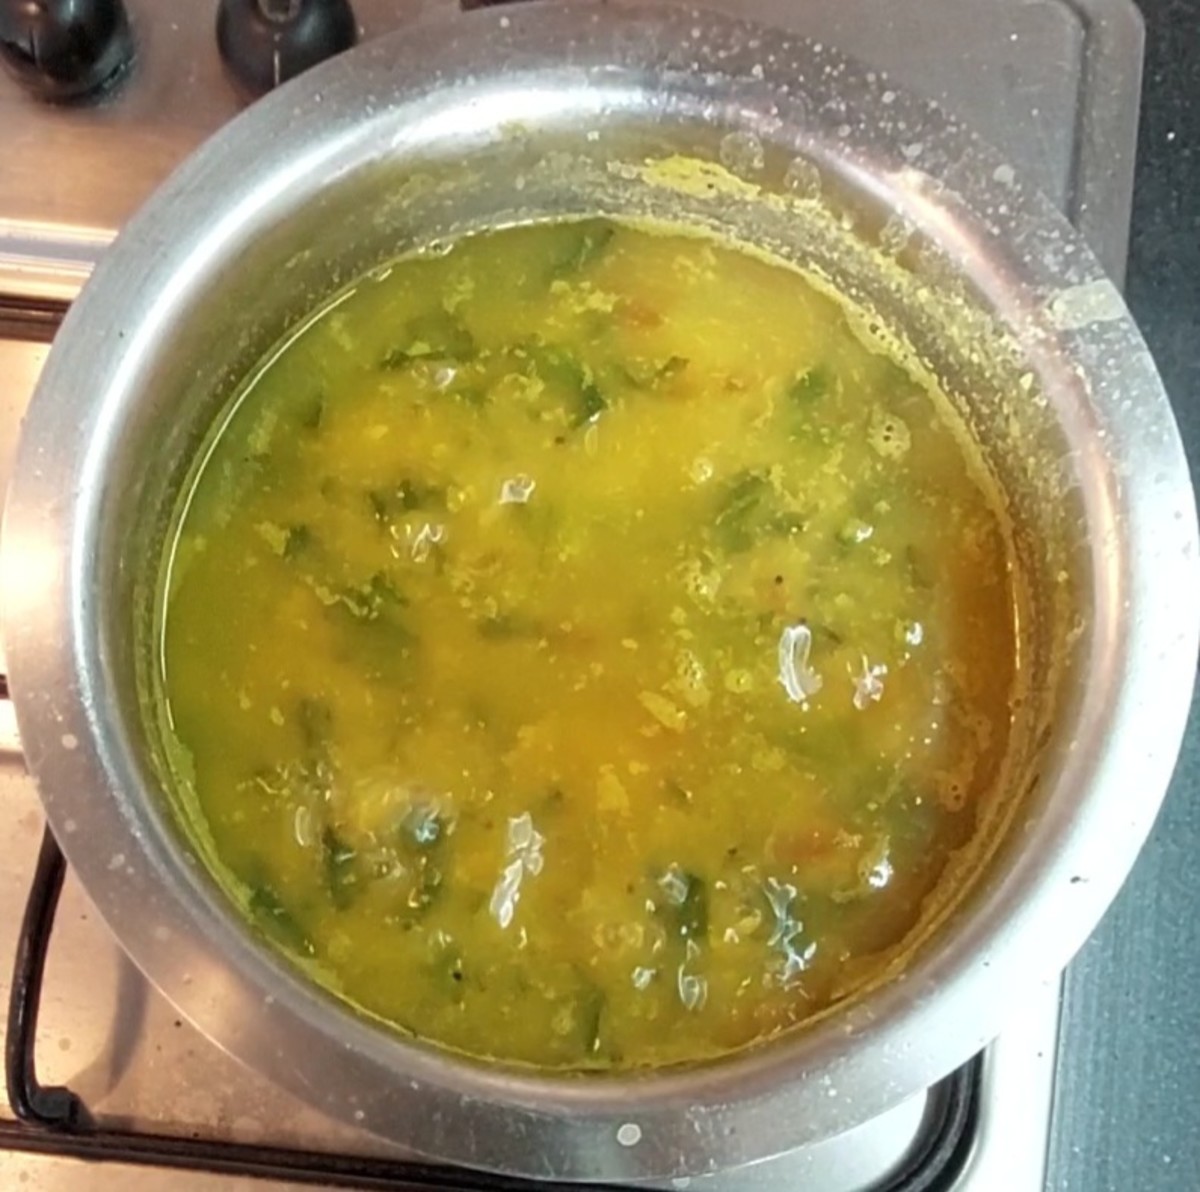 Add cooked dal and 1/2 cup water. Mix well. Add more water if required to adjust the consistency. Add salt to taste. Close the lid and cook for 10 minutes or till palak is cooked well.